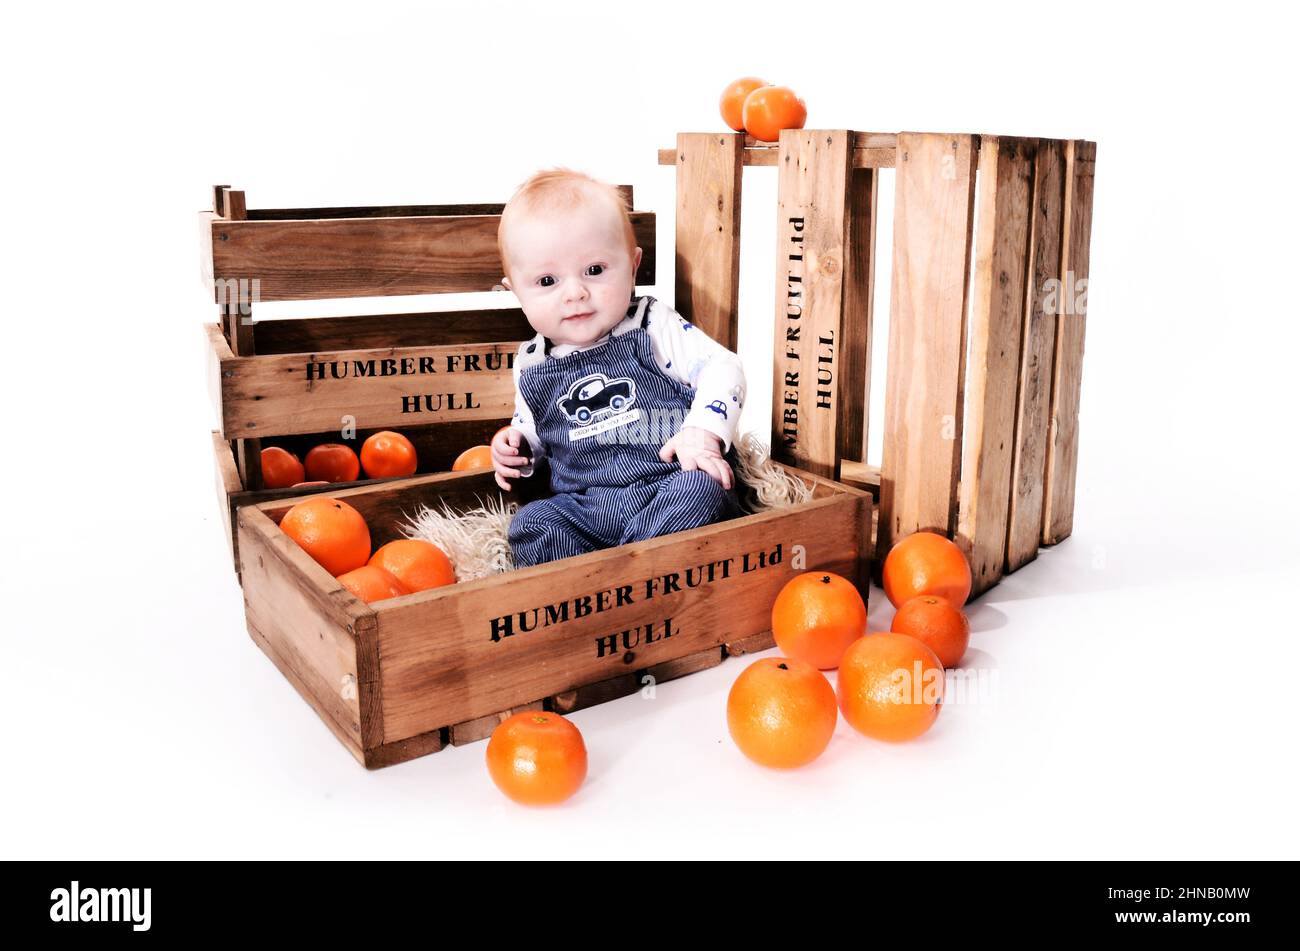 Happy infant boy with red hair playing in an orange fruit box Stock Photo